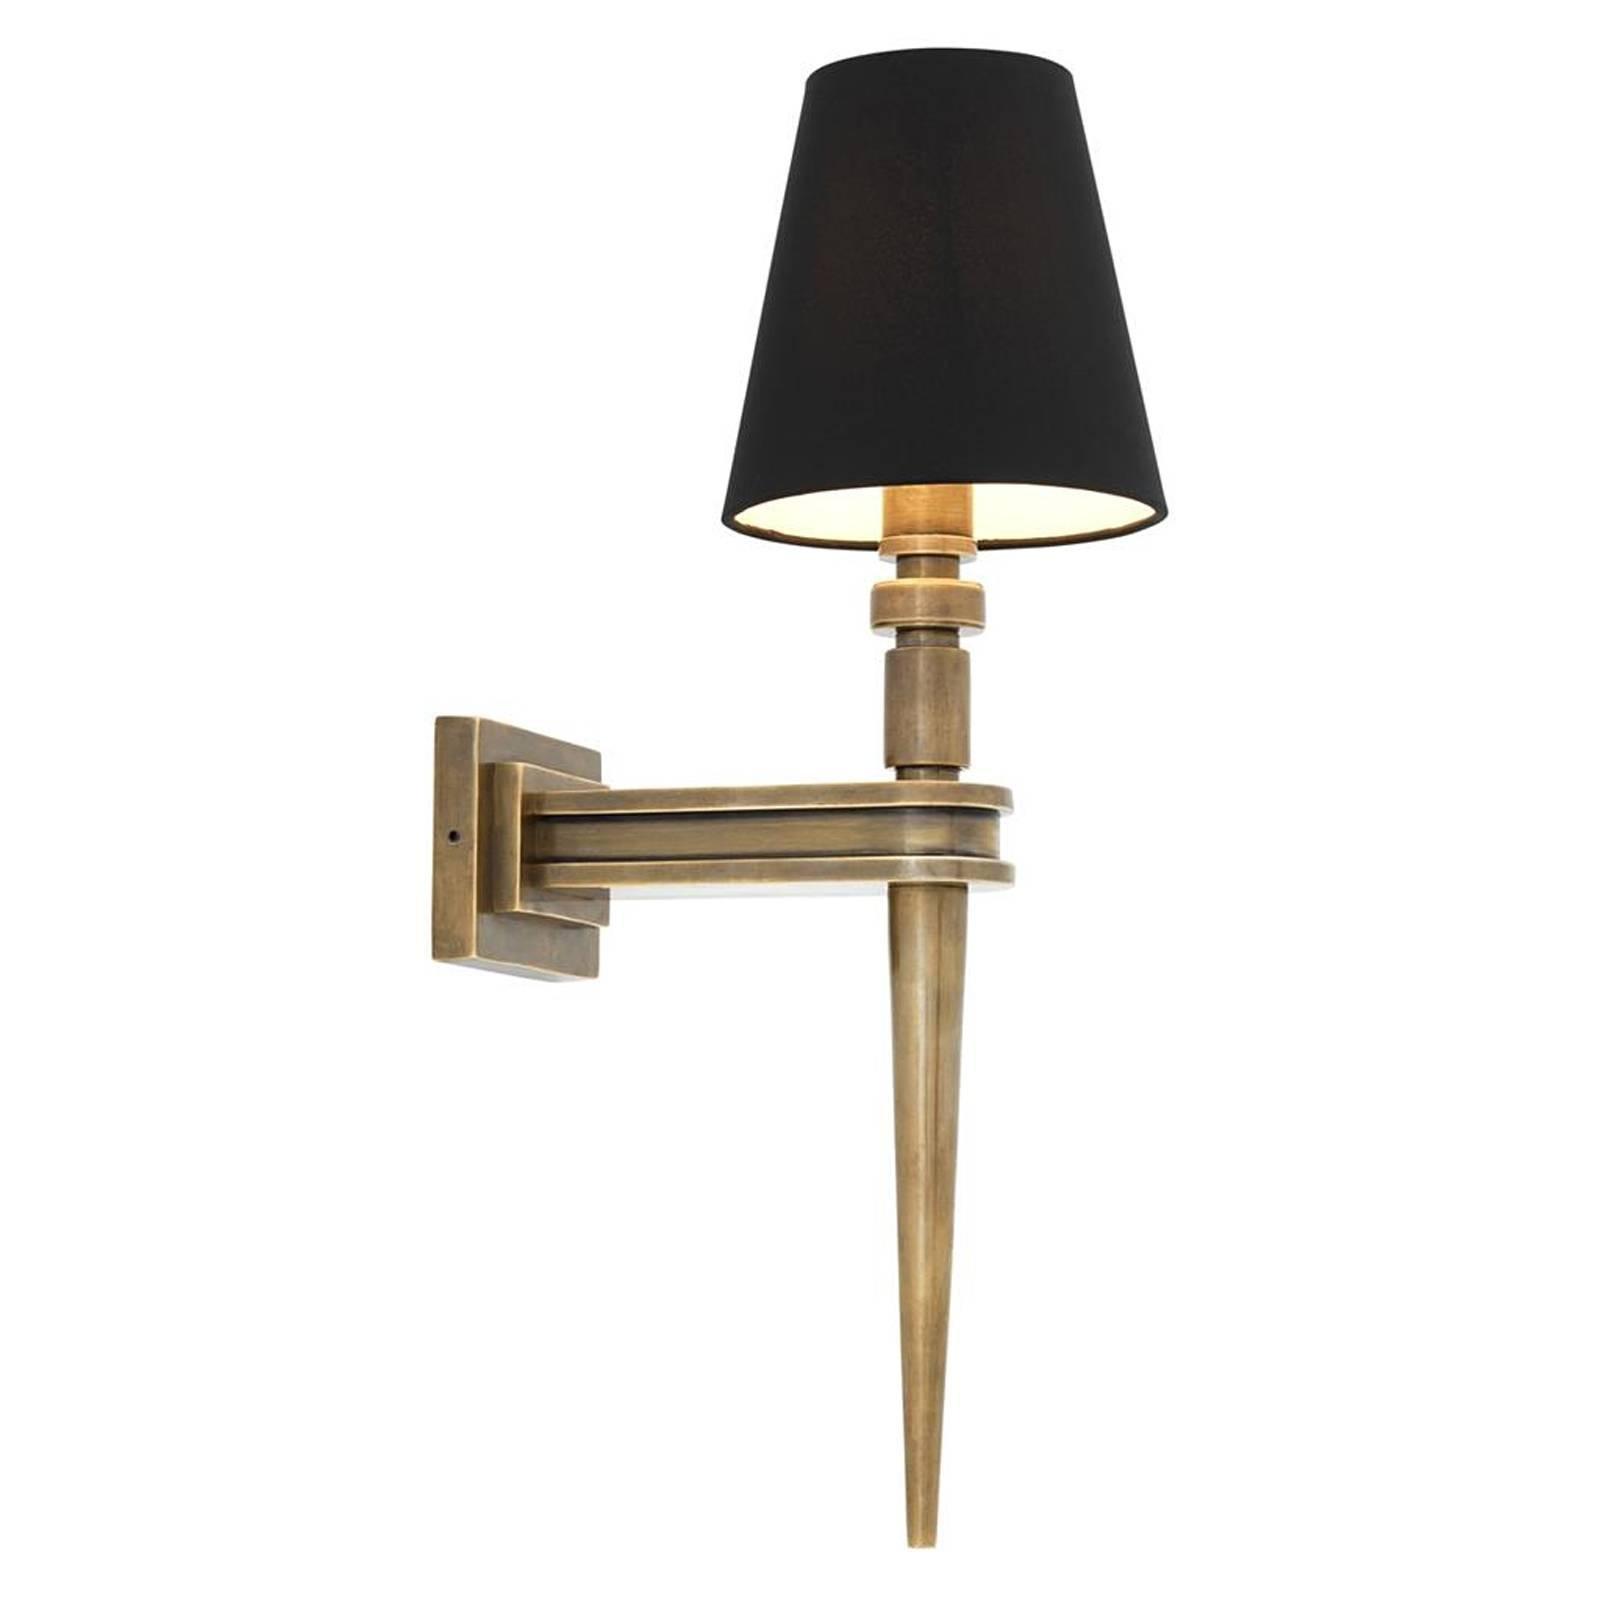 Wall lamp Austerlitz single with vintage brass
structure and black shade. One bulb lamp holder
type E14, max 40 watt. Bulb not included.
Also available in nickel finish.
Also available in Austerlitz triple.
